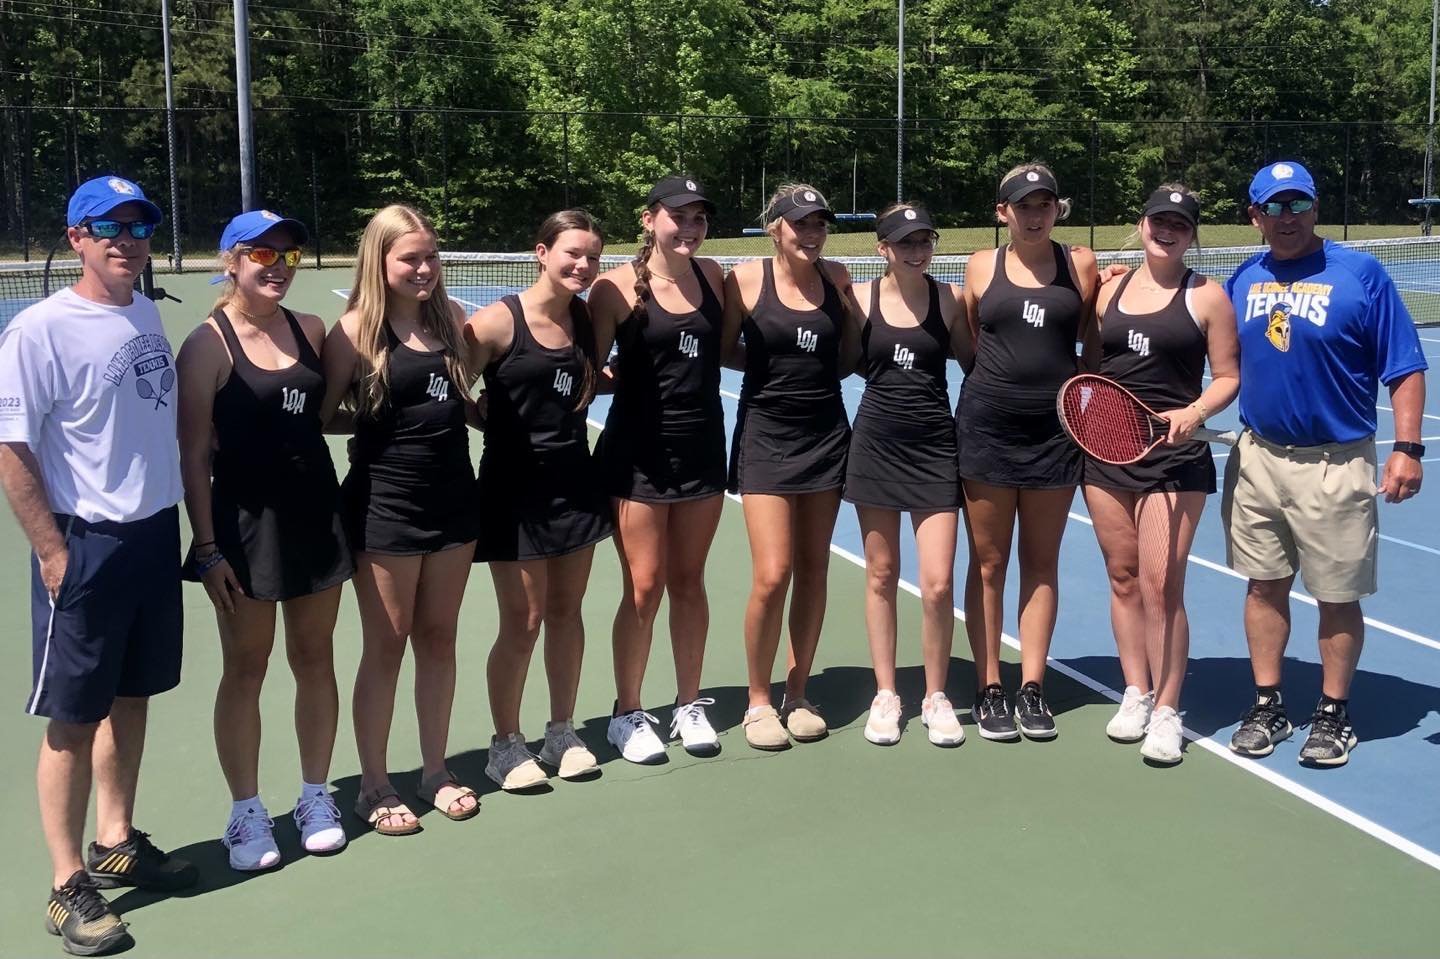 LOA girls tennis makes school history!  They are going to the State Championship!  May 11 at Berry College.  Hard work pays off!  #ONETitan